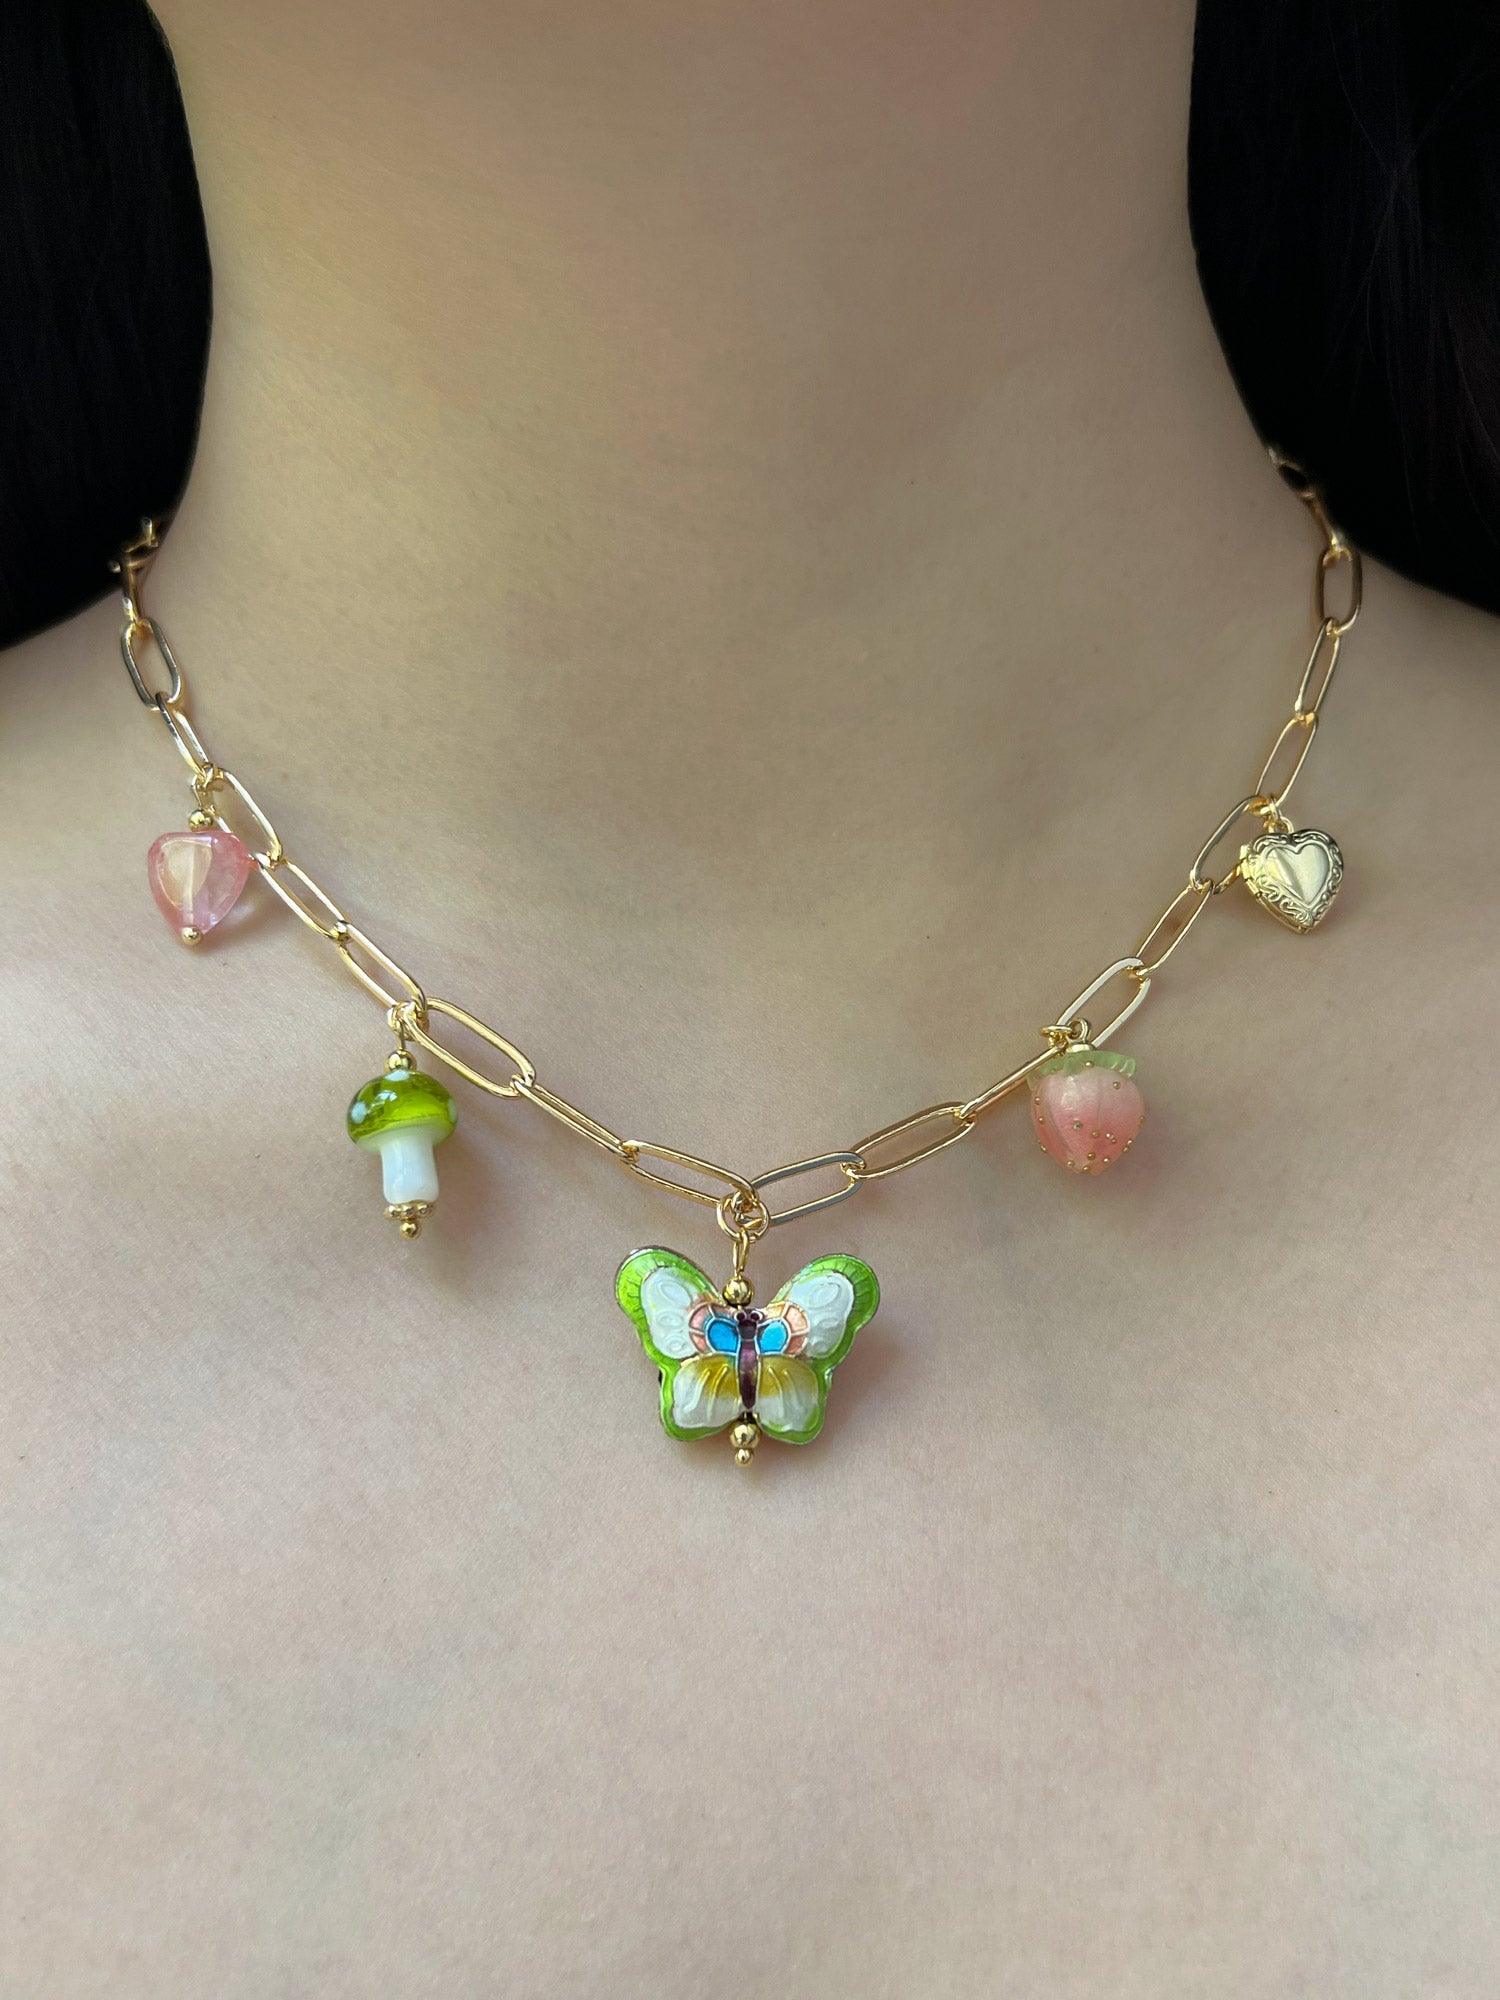 Butterfly Cloisonne Charm Necklace with Mushroom - Apple Green